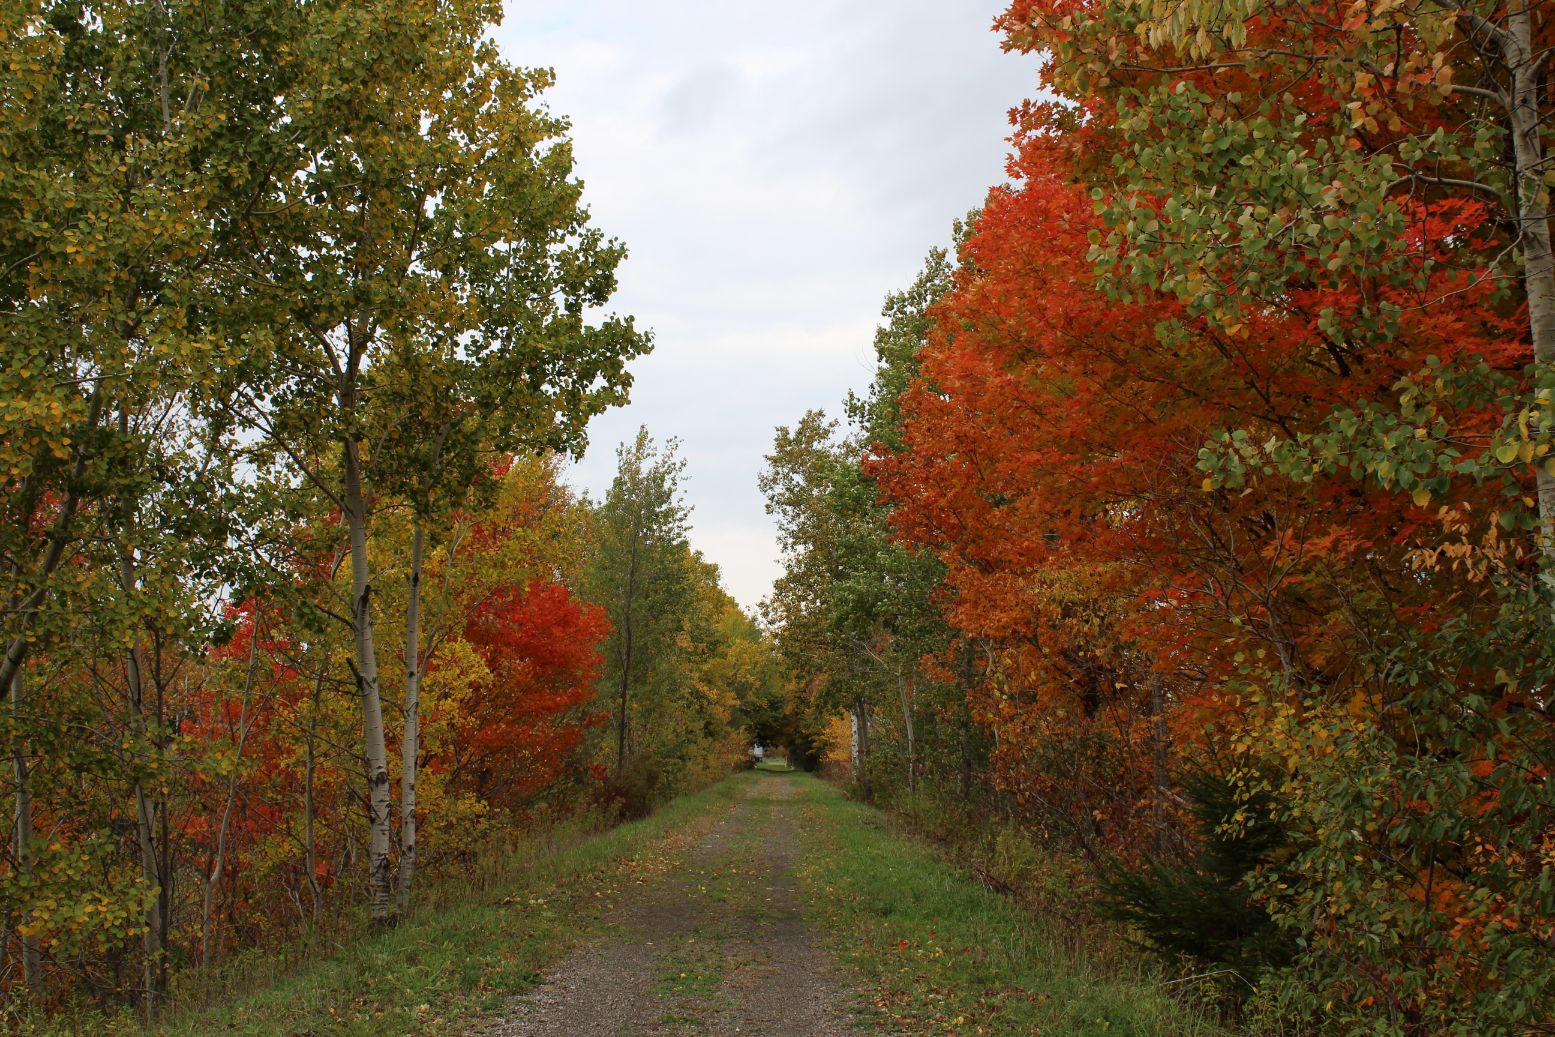 A dirt road with trees in the background